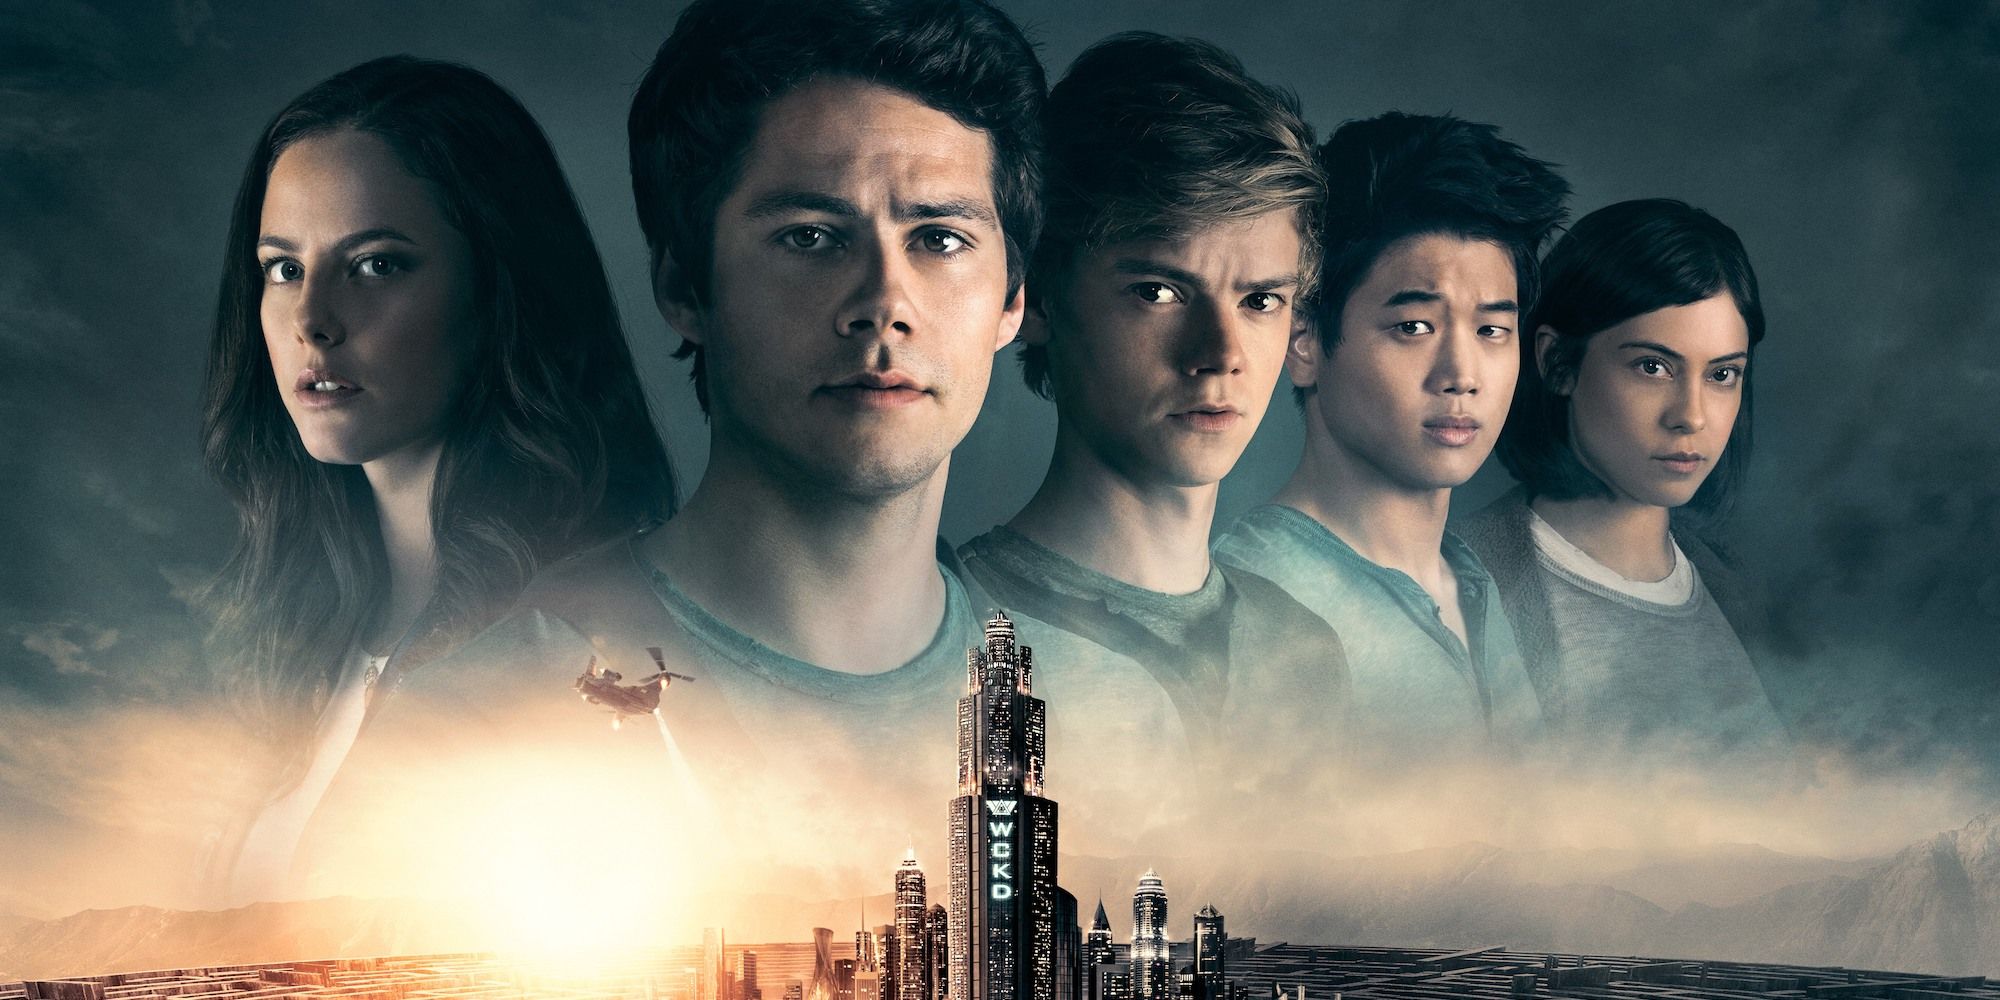 Teresa, Thomas, Newt, Minho, and Brenda in the Maze Runner: The Death Cure poster